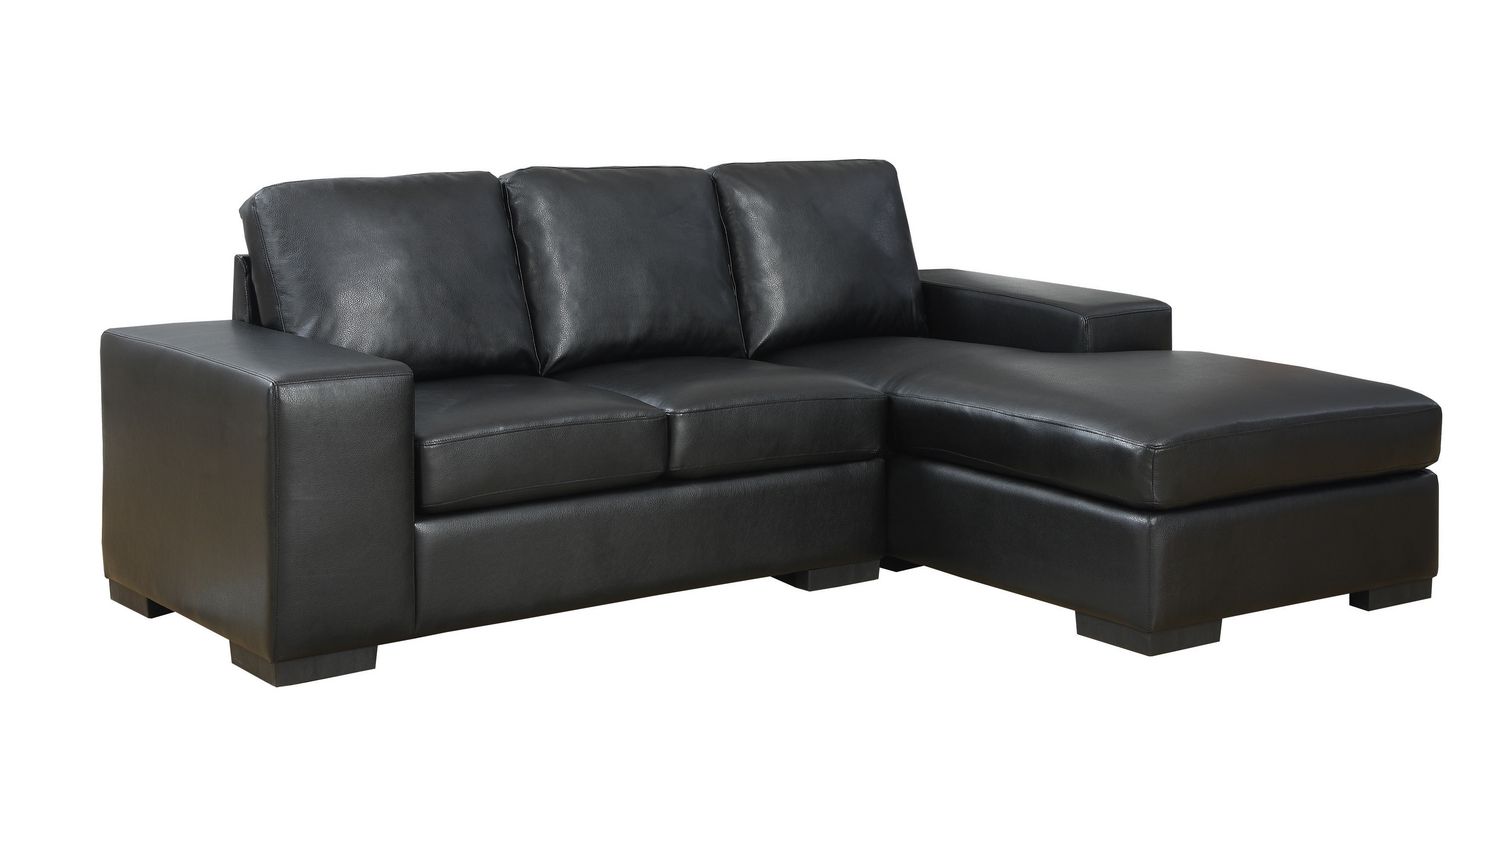 monarch specialties leather sofa lounger reviews